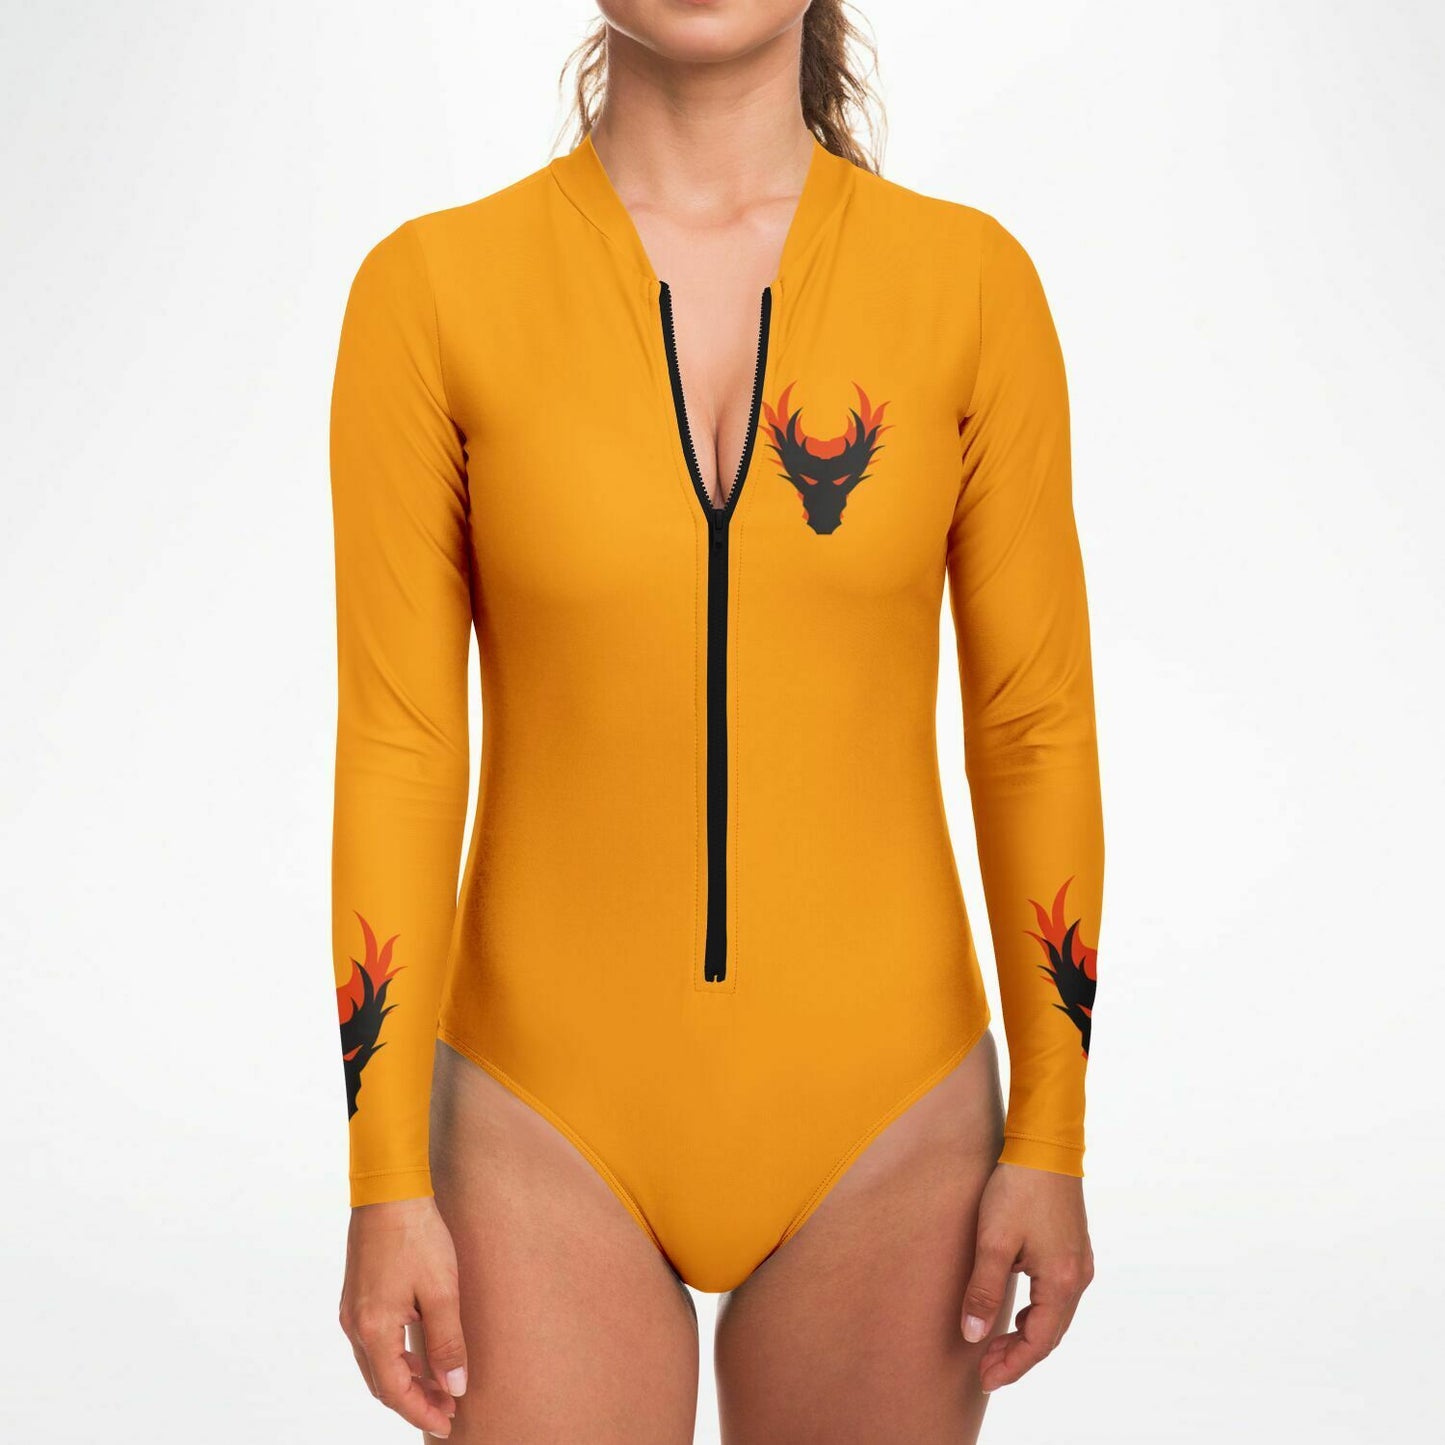 uv protection long sleeve zip up bodysuit swimsuit leotard fireside by Dragon Guard Apparel